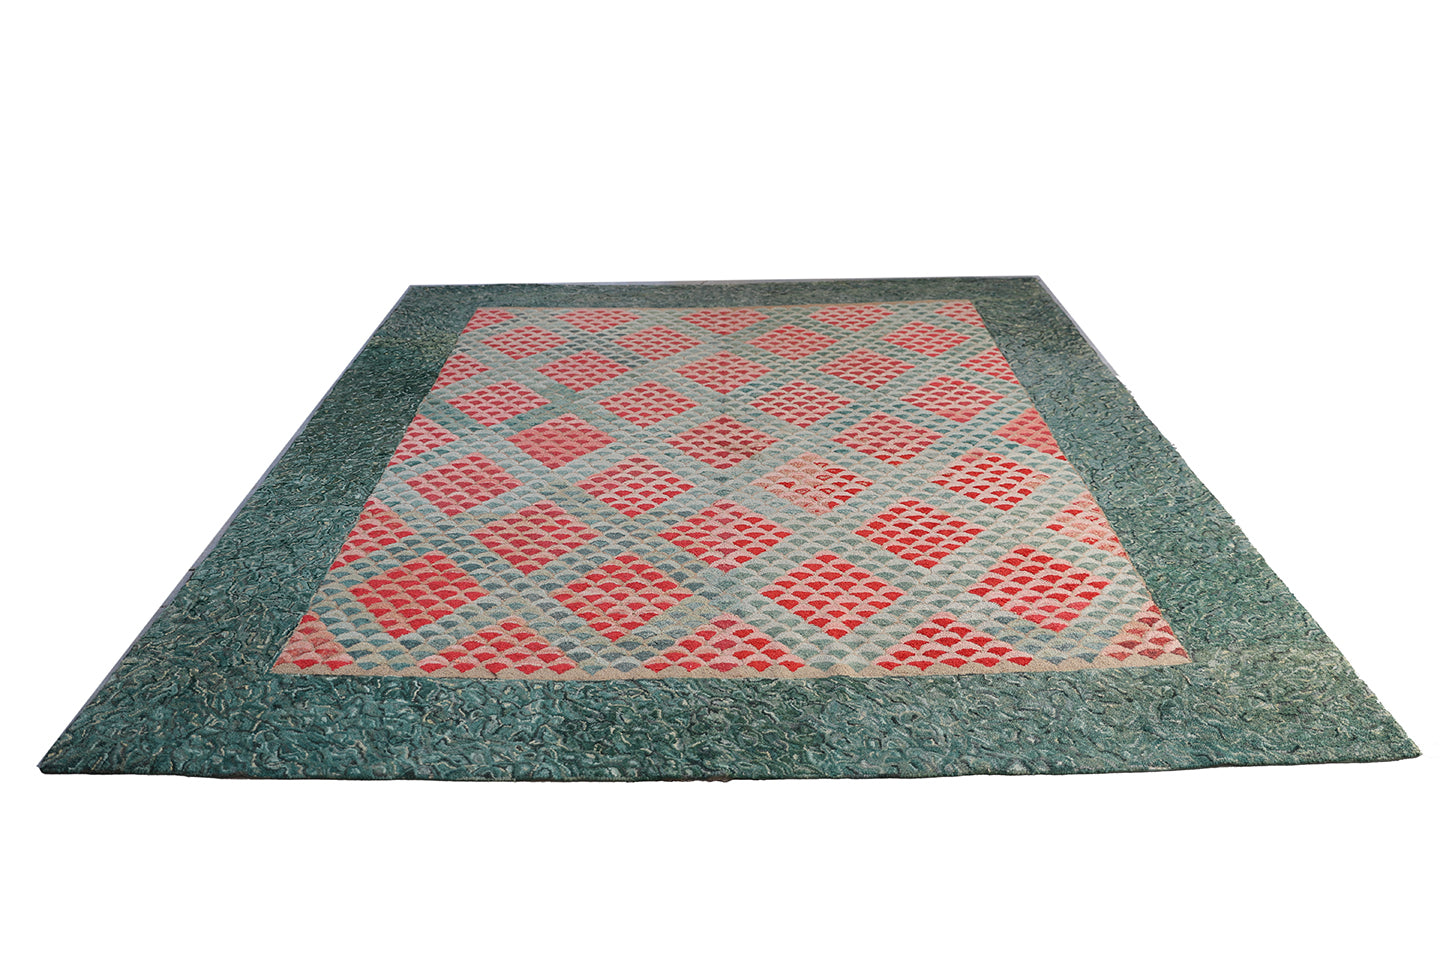 8'x10' Red and Green Fish Scale Pattern Antique American Art Deco Hooked Rug